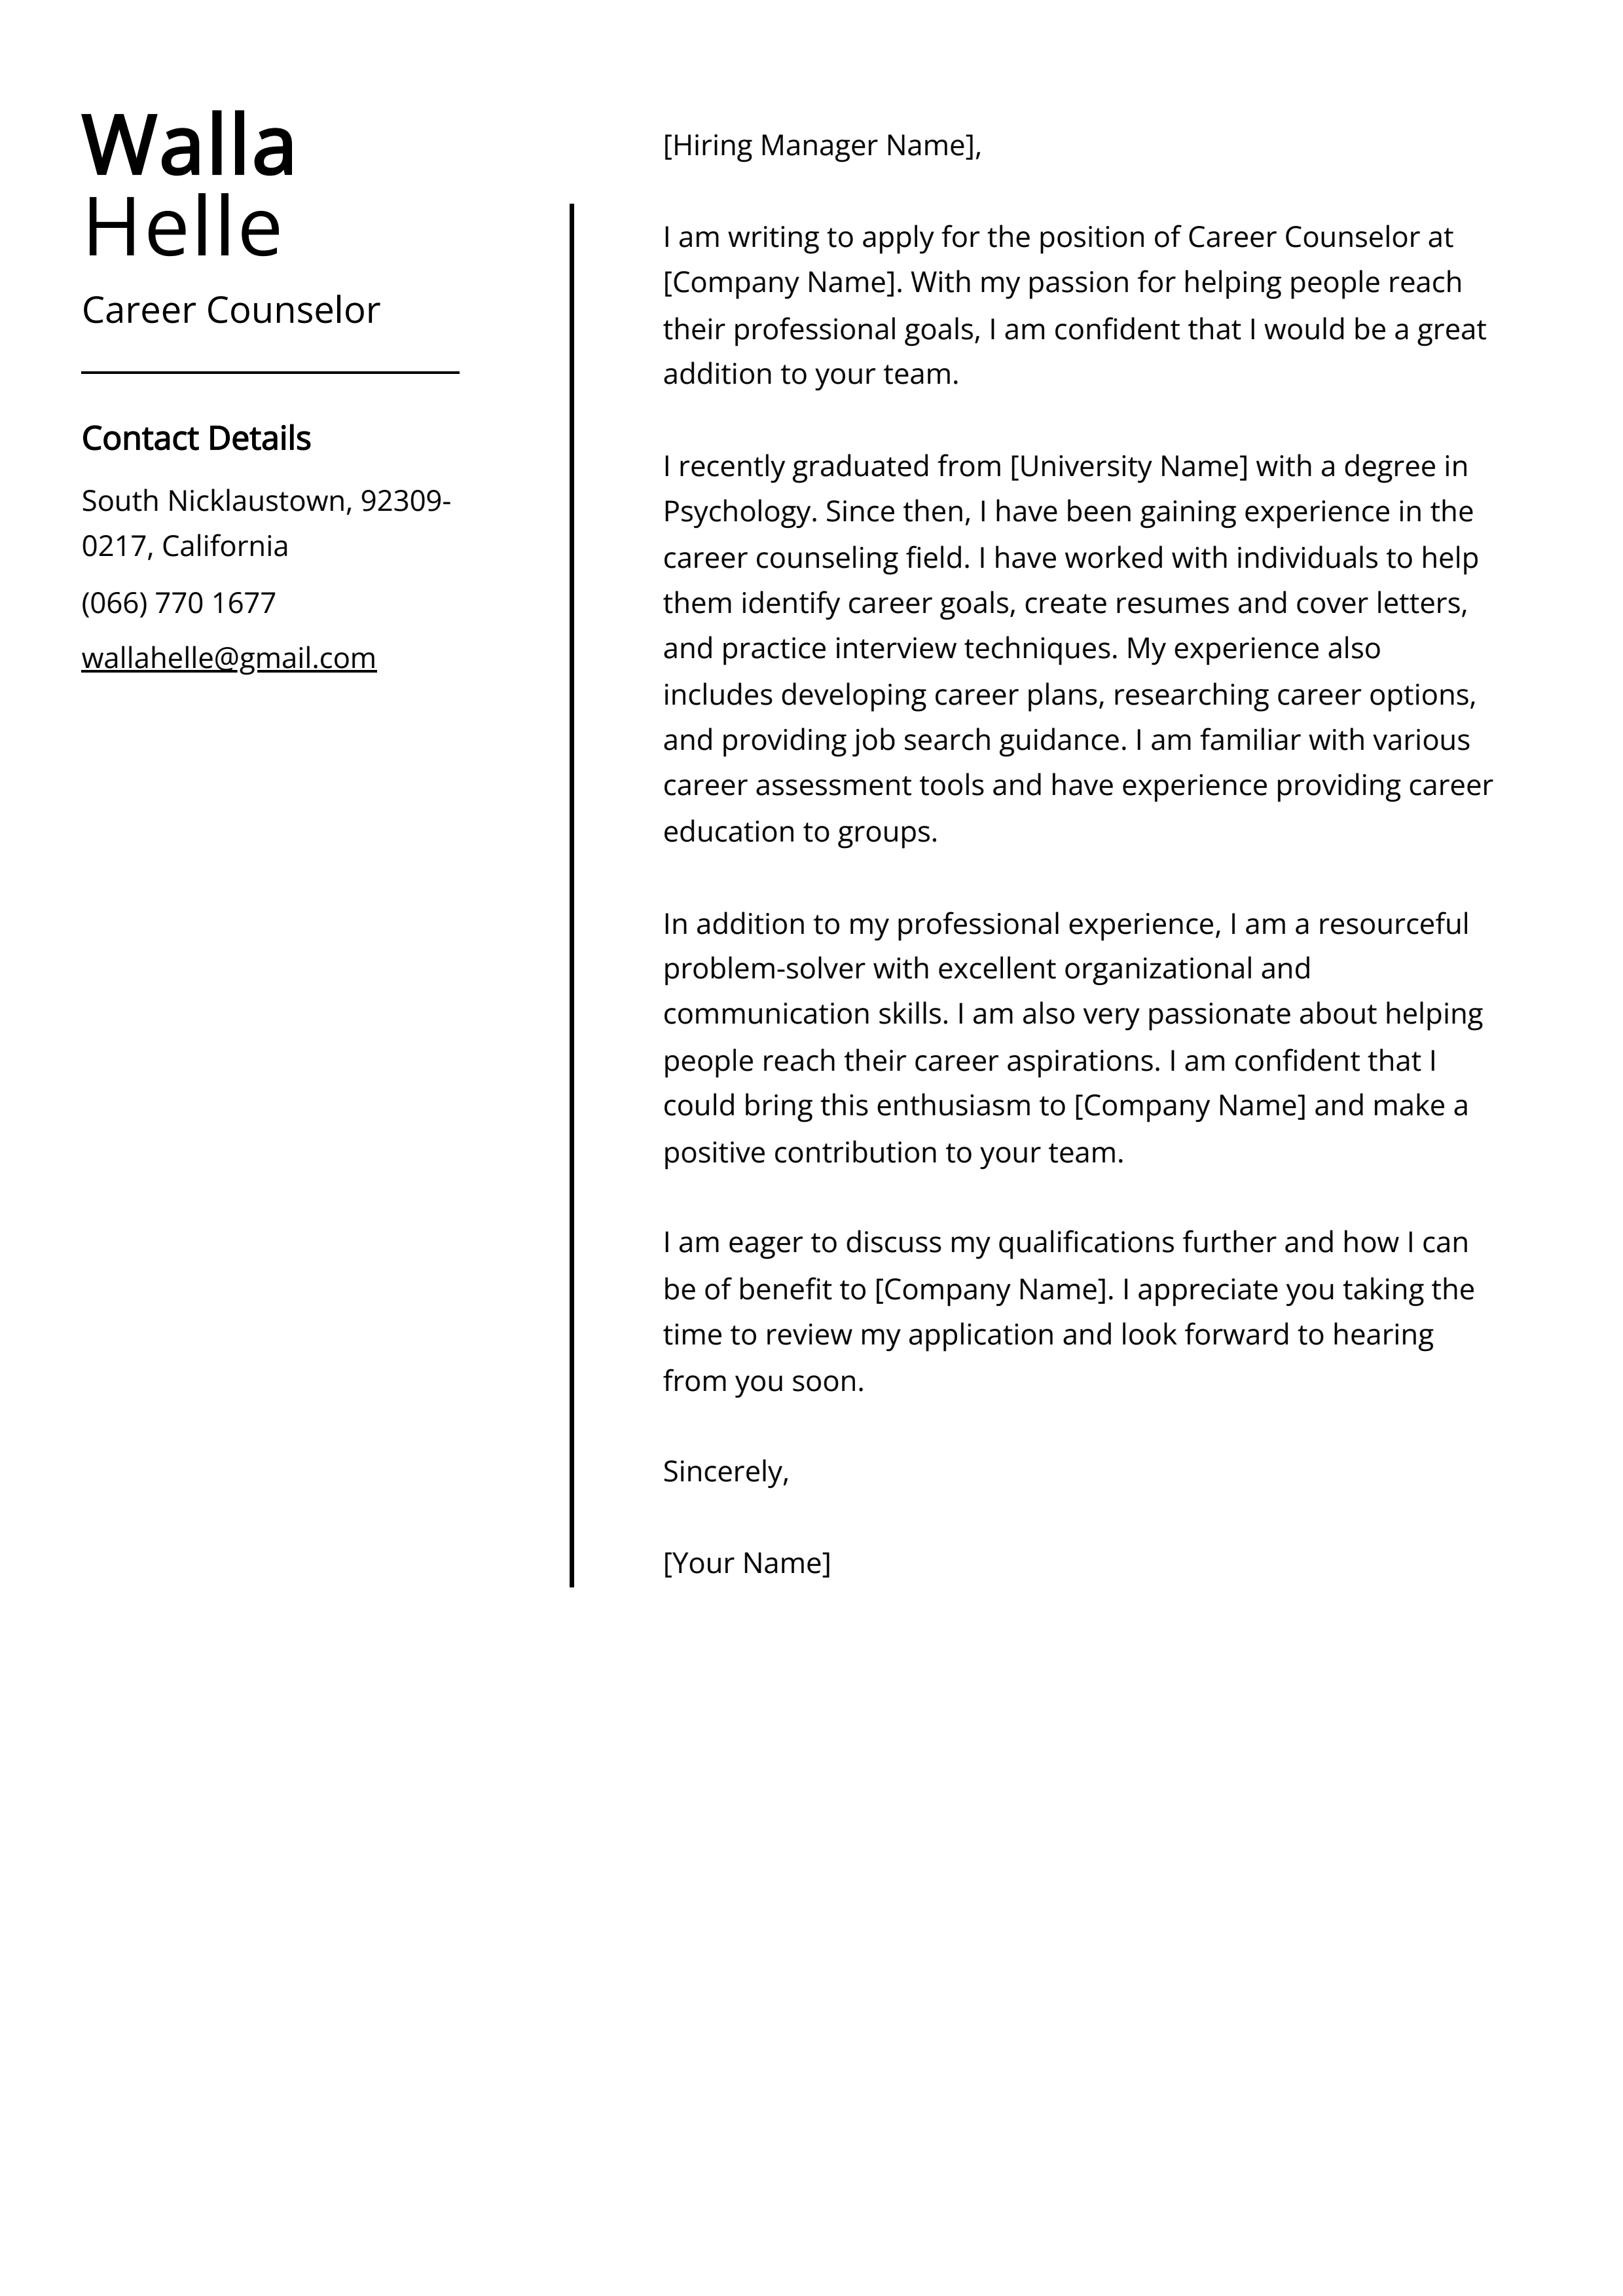 Career Counselor Cover Letter Example